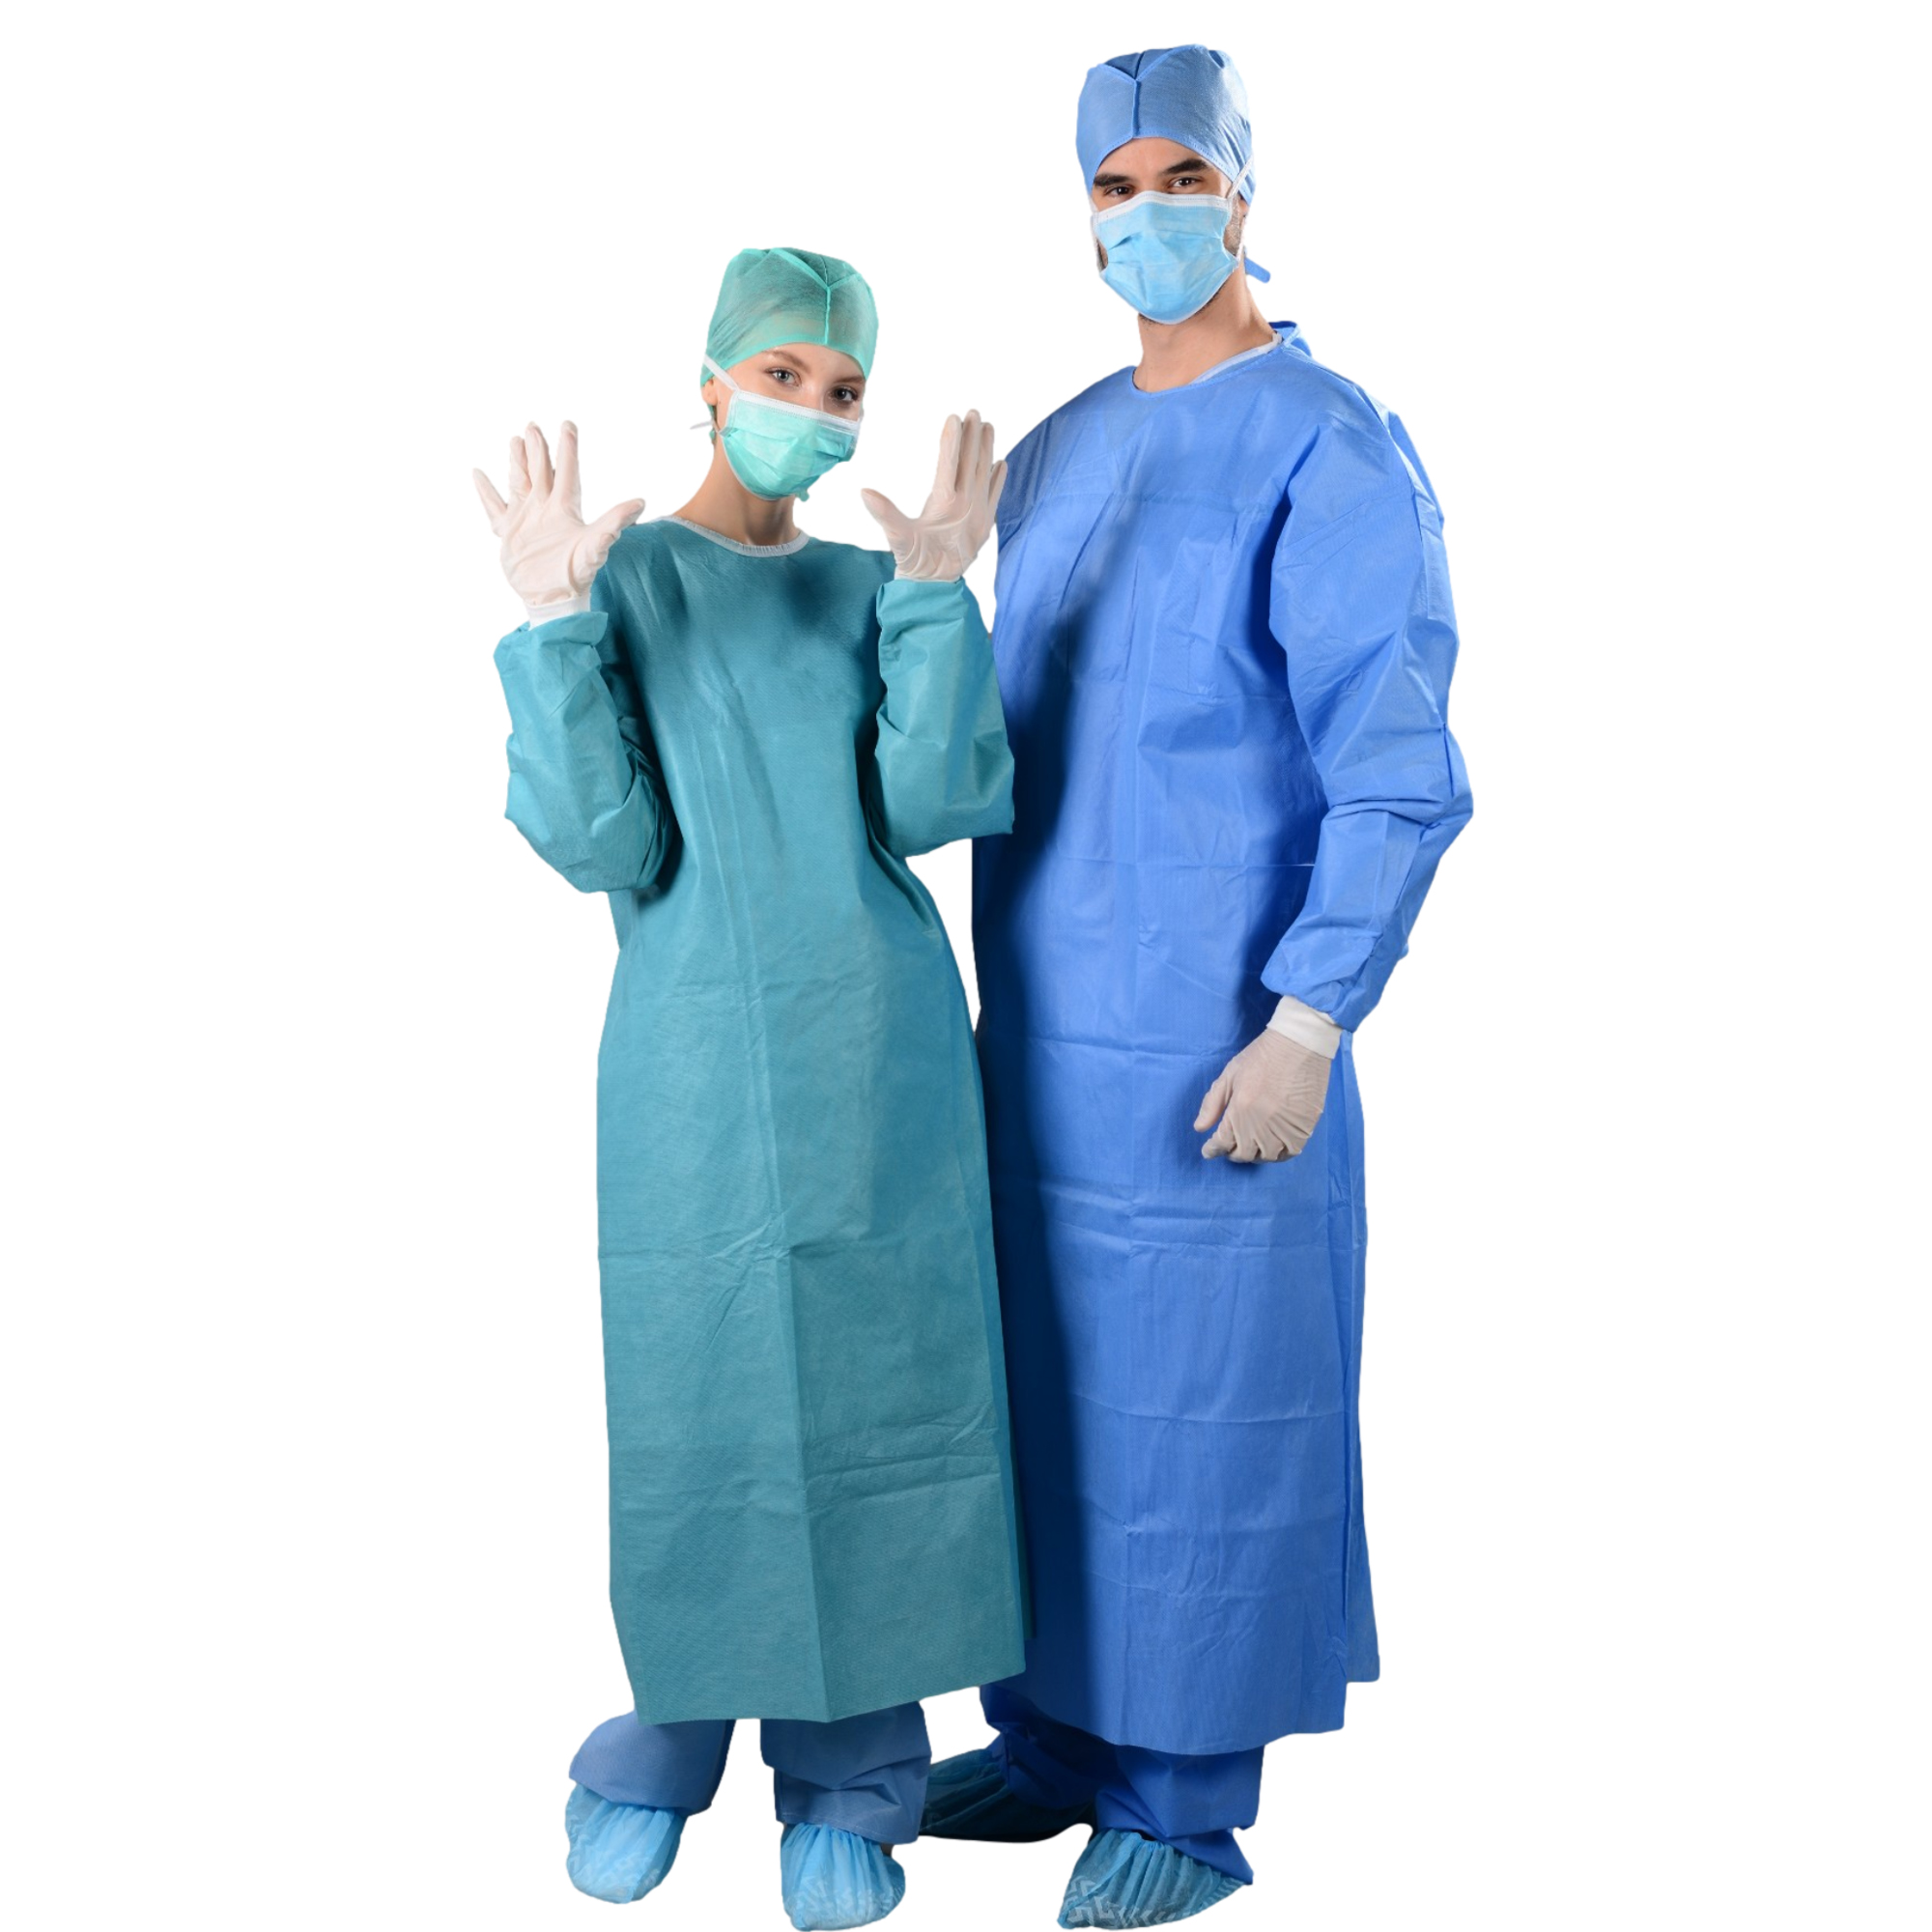 Surgical drape, Surgical pack, surgical gown Manufacturer & Supplier ...